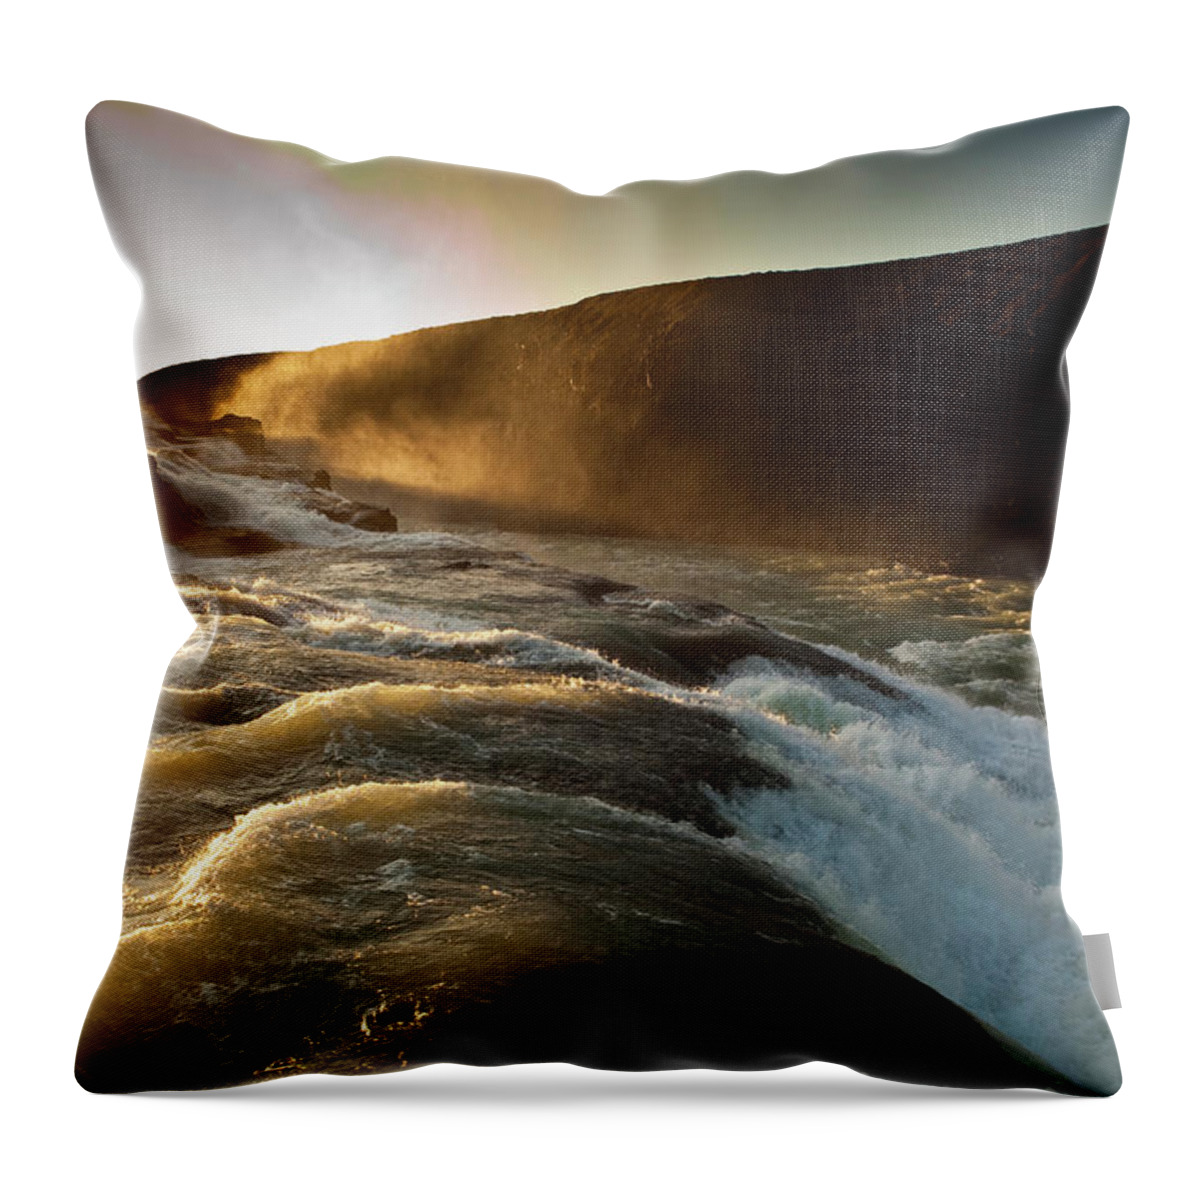 Scenics Throw Pillow featuring the photograph Gullfoss Waterfall #1 by Richard I'anson